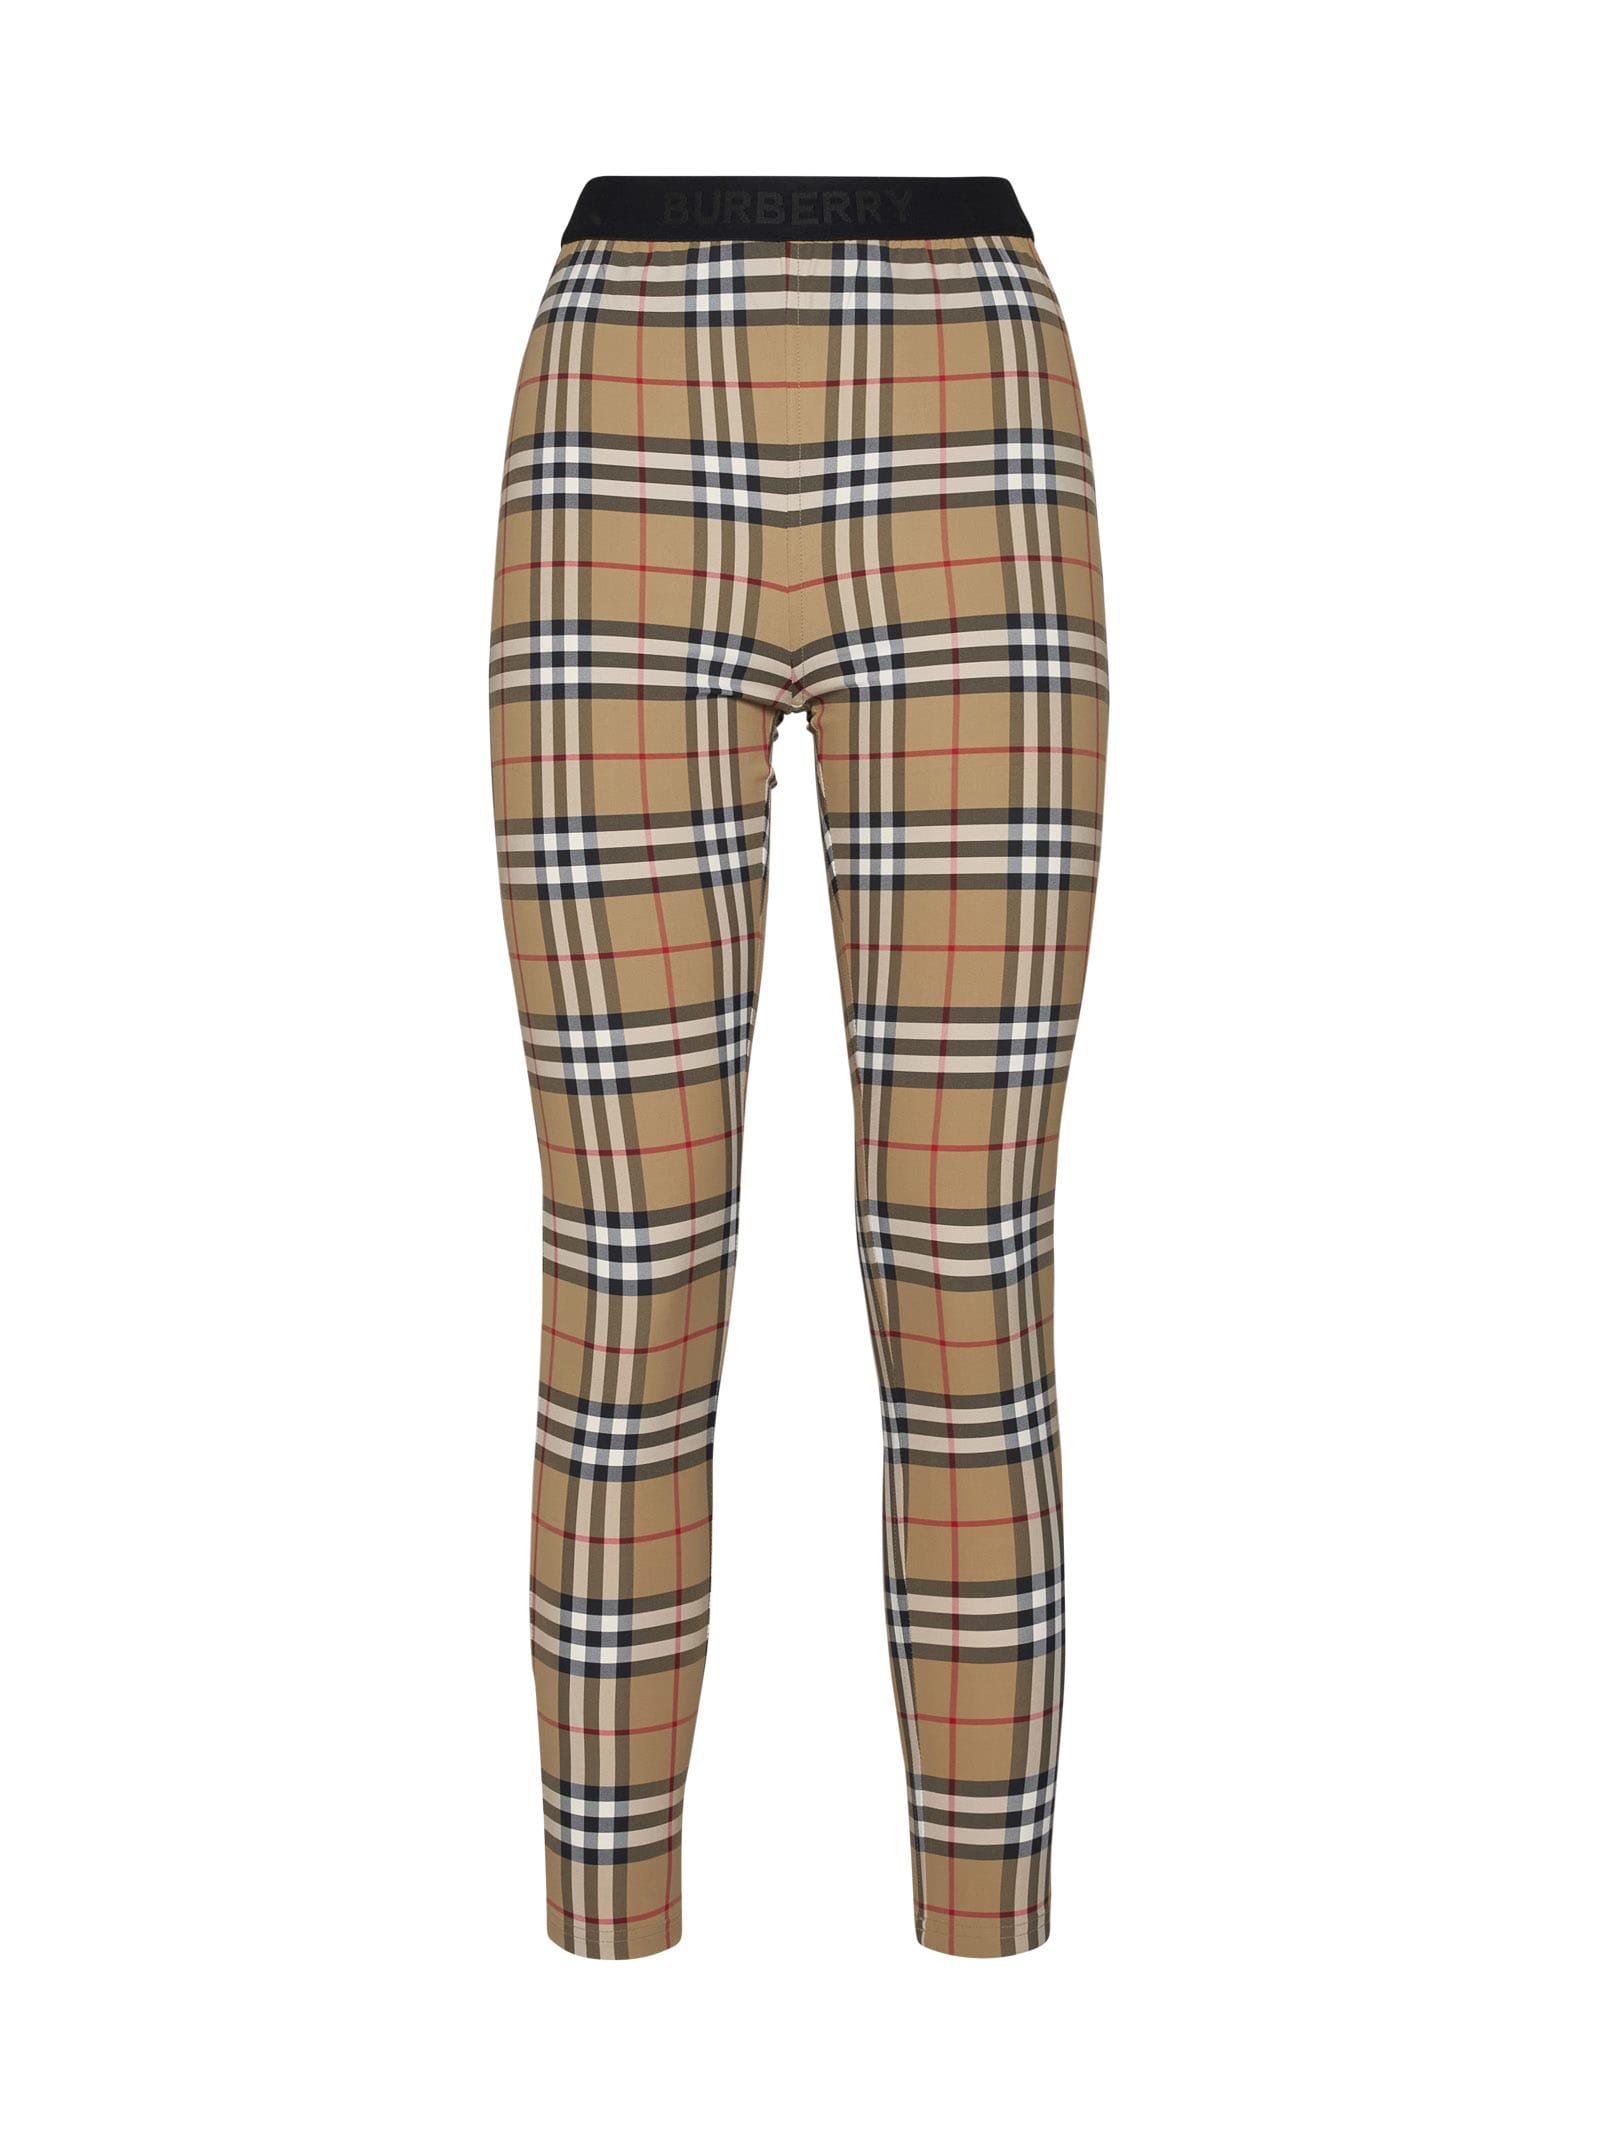 Burberry Checked Cotton Pants for Women for sale  eBay